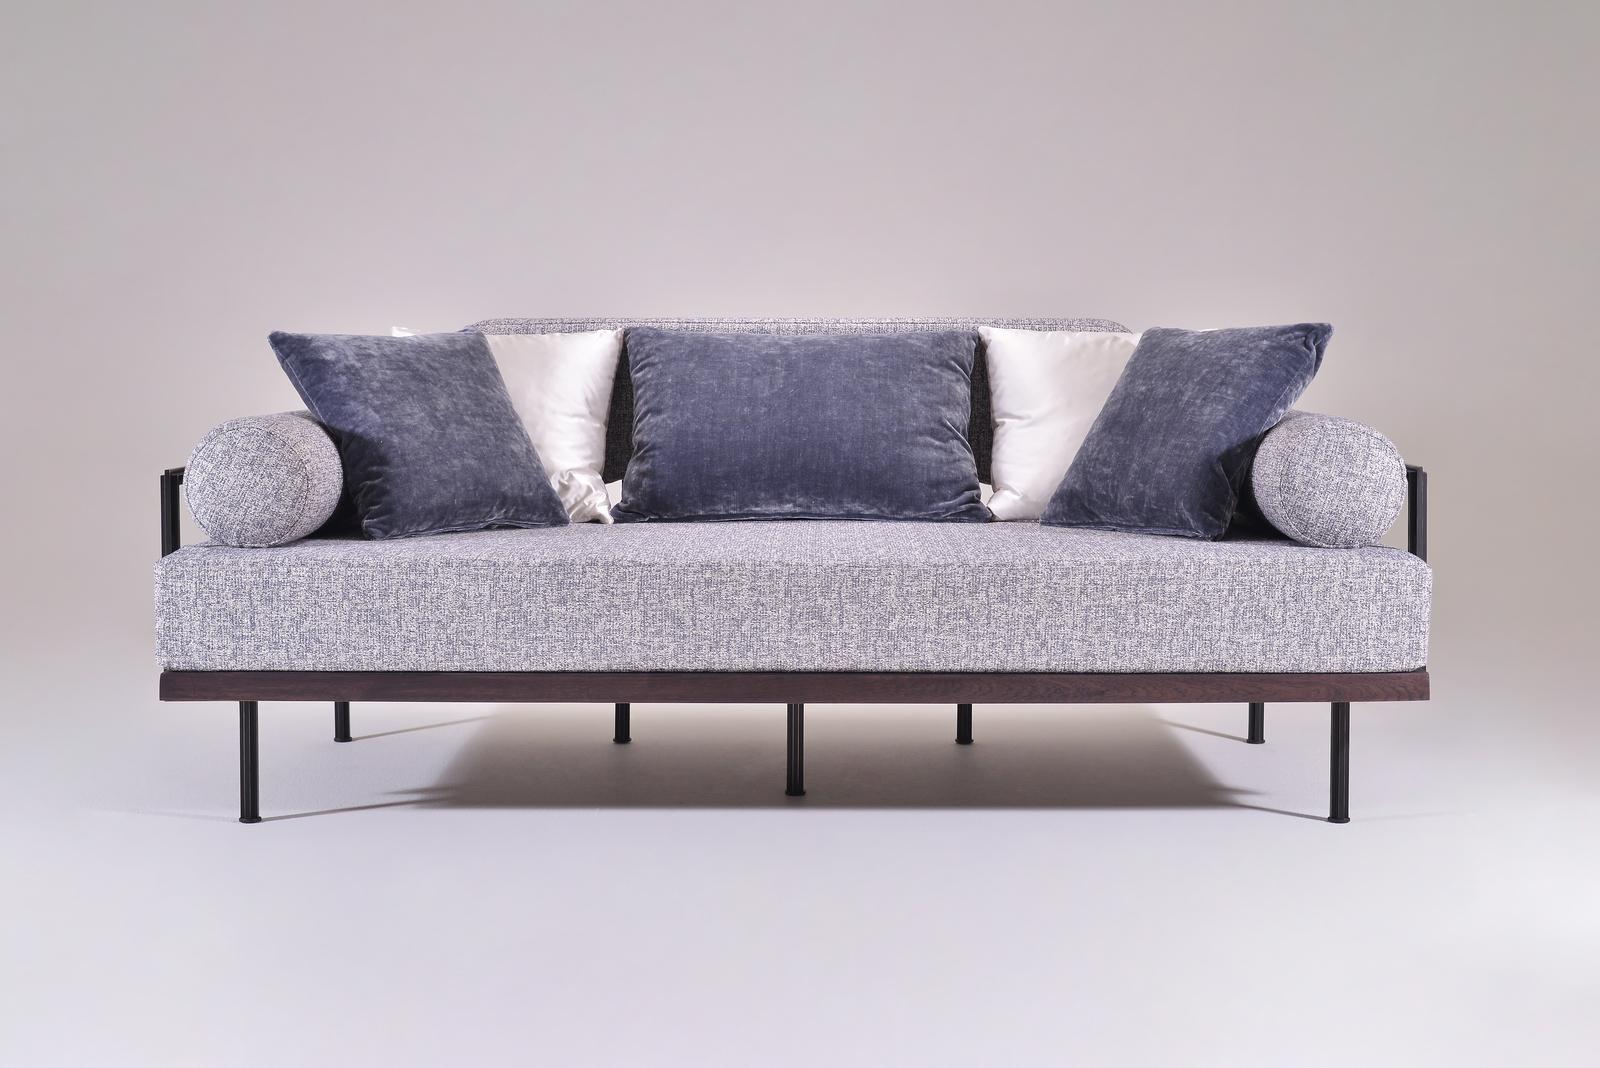 Thai Bespoke Two-Seat Sofa in Reclaimed Hardwood and Brass Frame by P. Tendercool For Sale